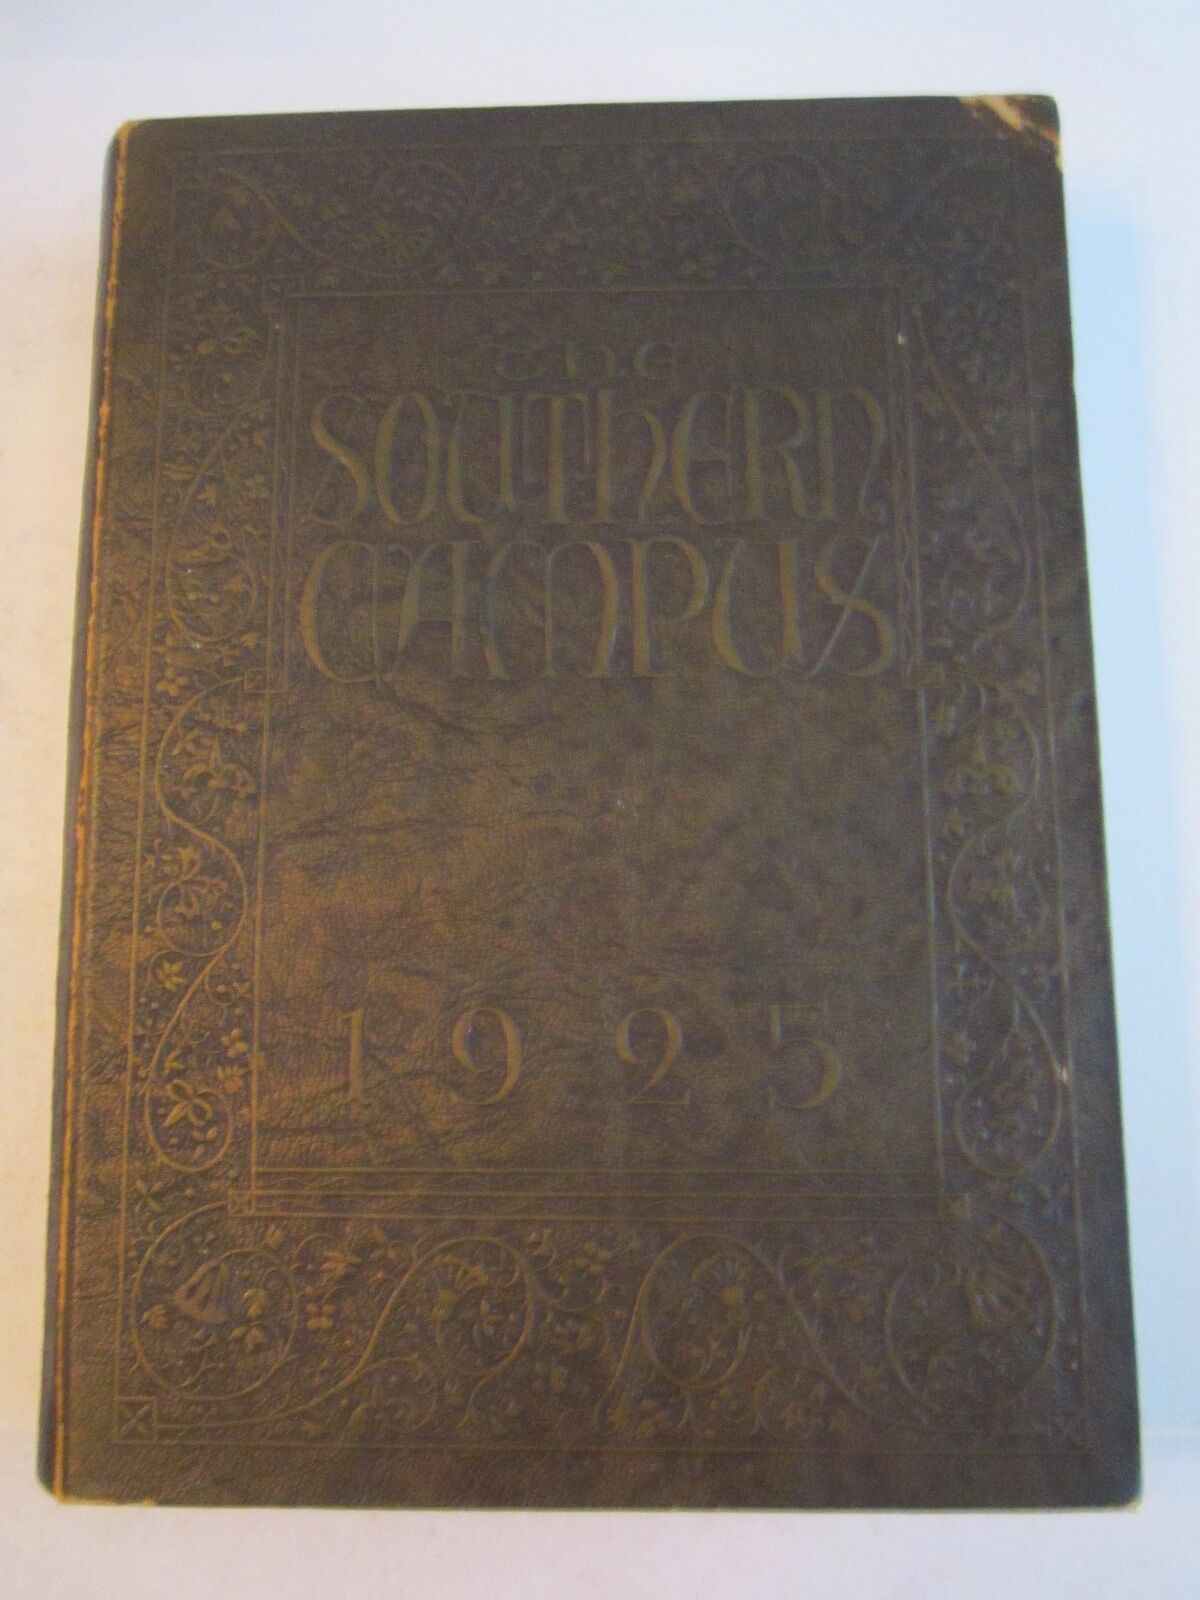 1925 UCLA YEARBOOK SOUTH CAMPUS - RALPH BUNCHE - NOBEL PEACE PRIZE WINNER